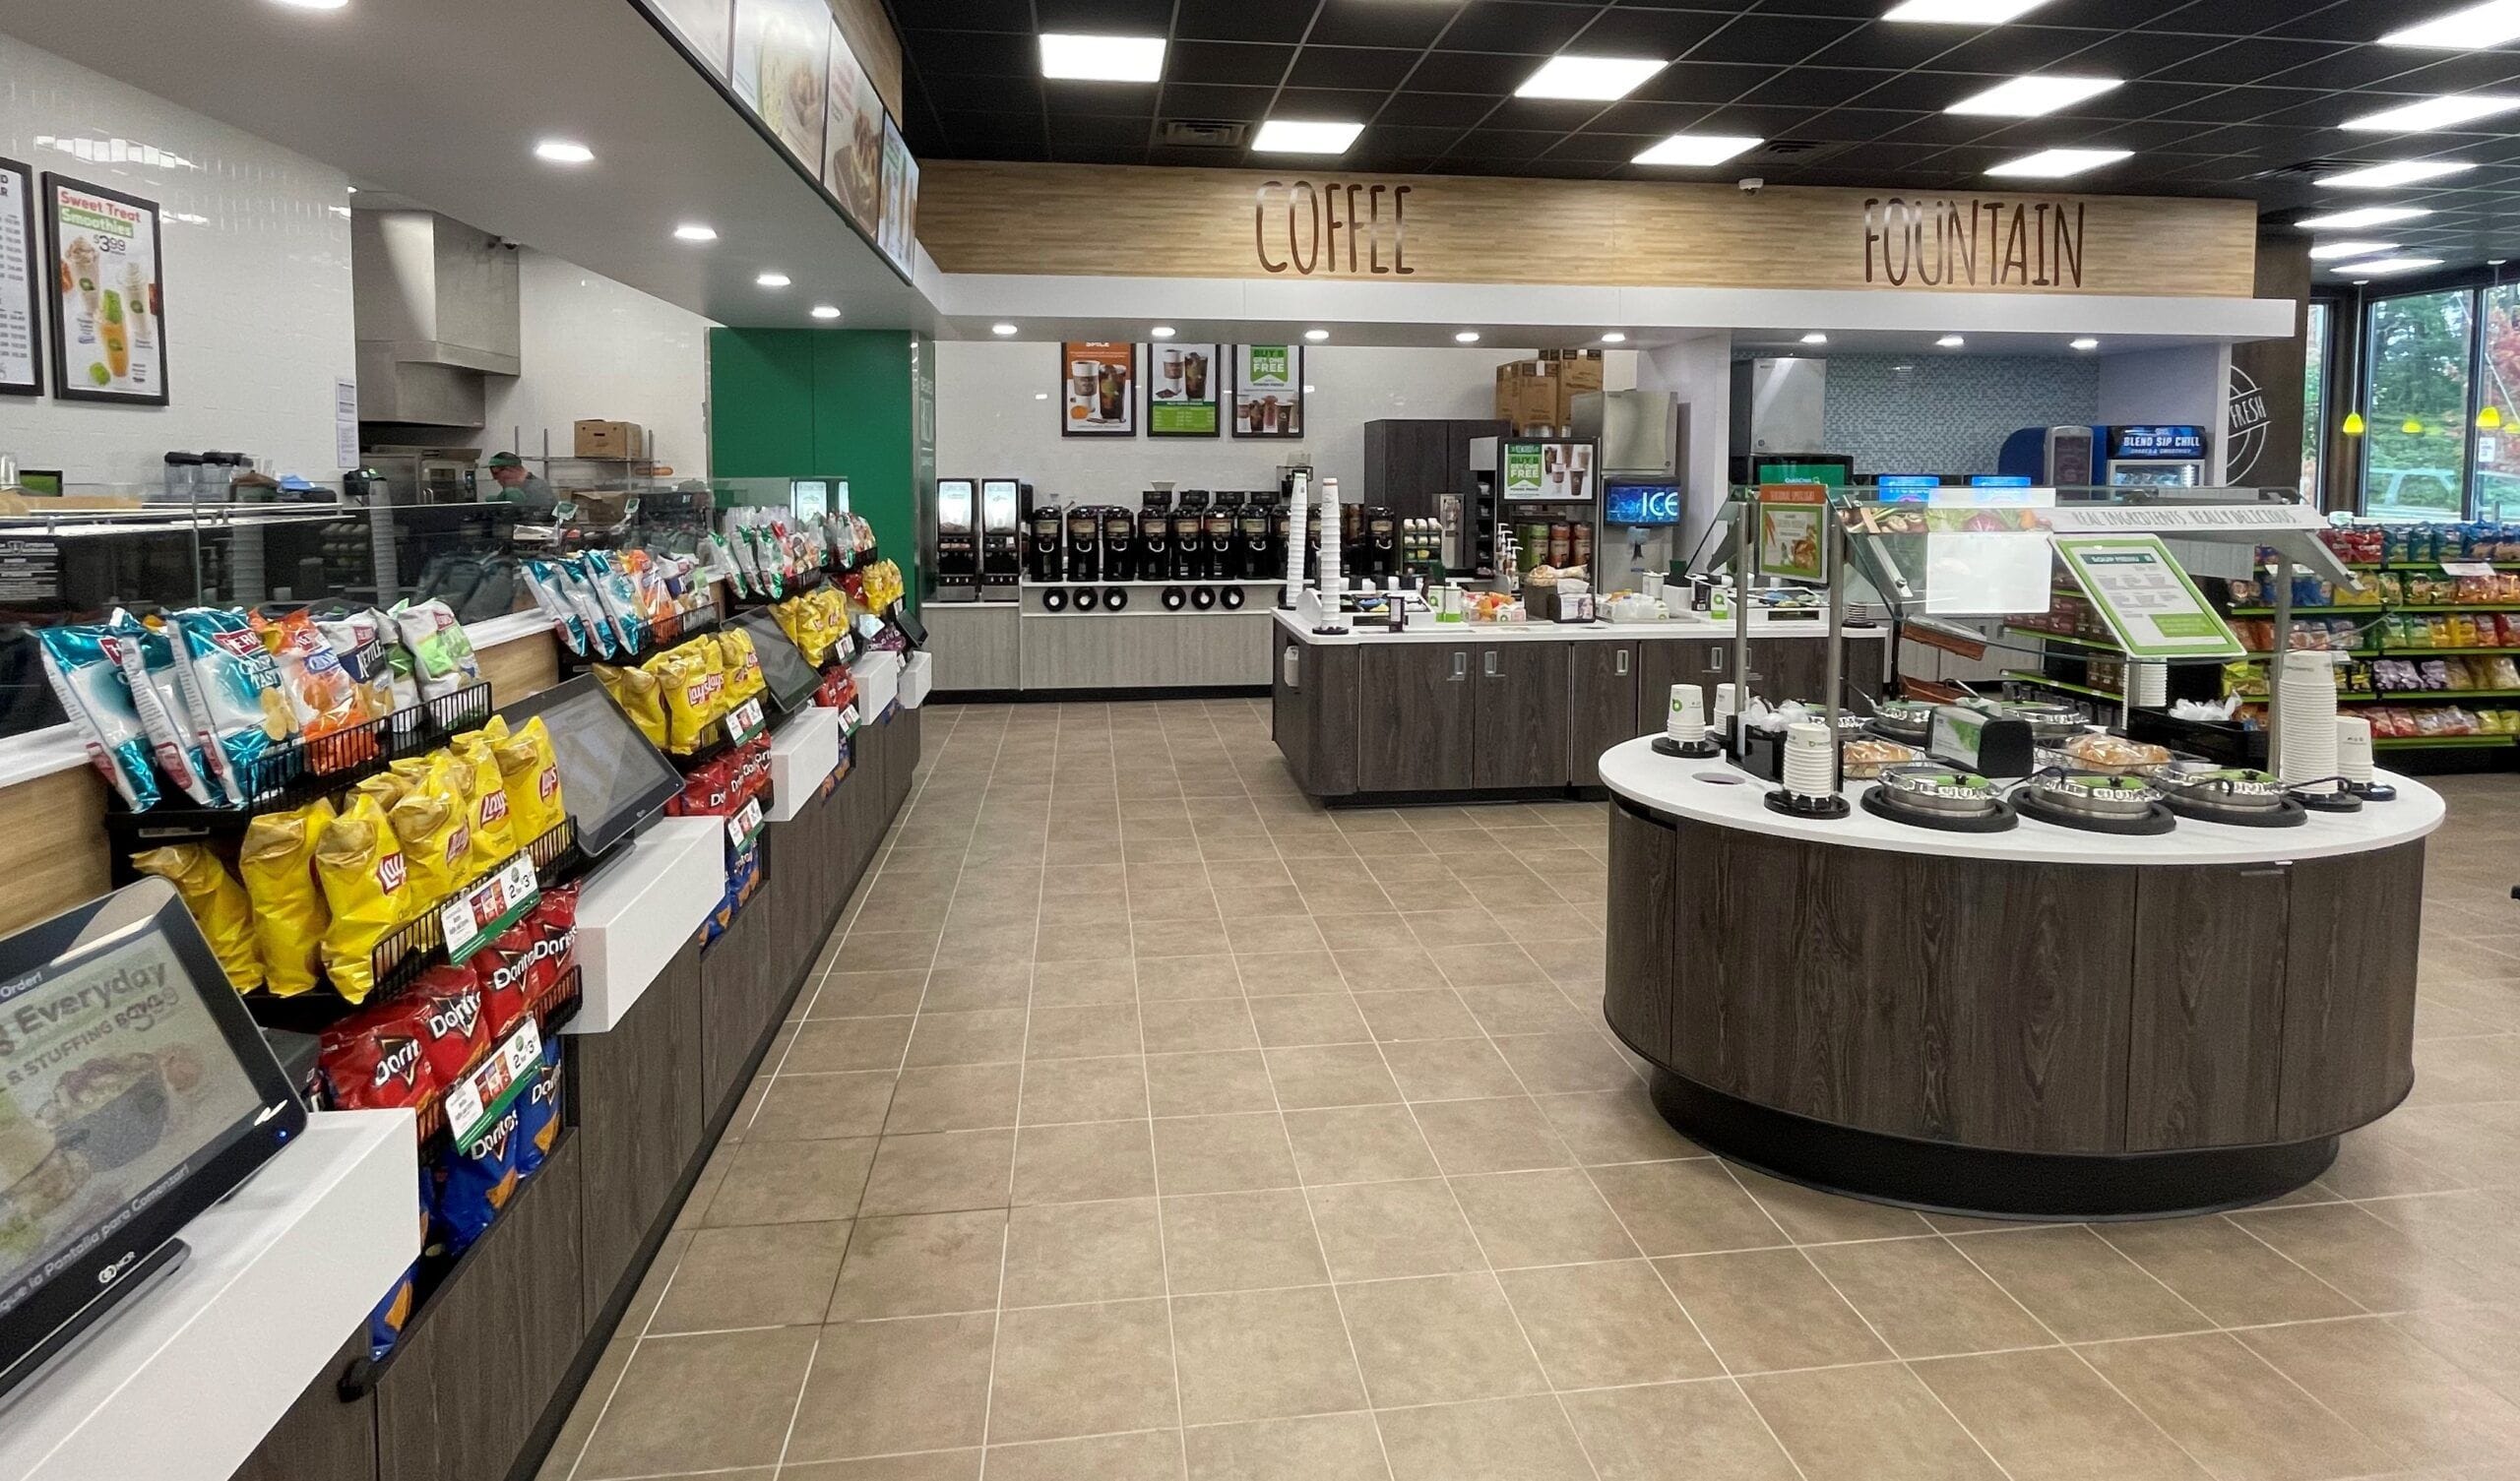 QuickChek&#8217;s One-Stop Shopping Experience Meets The Needs Of Today&#8217;s Consumer Made-To-Order Fresh Meals, Award-Winning Coffee And Then Some!